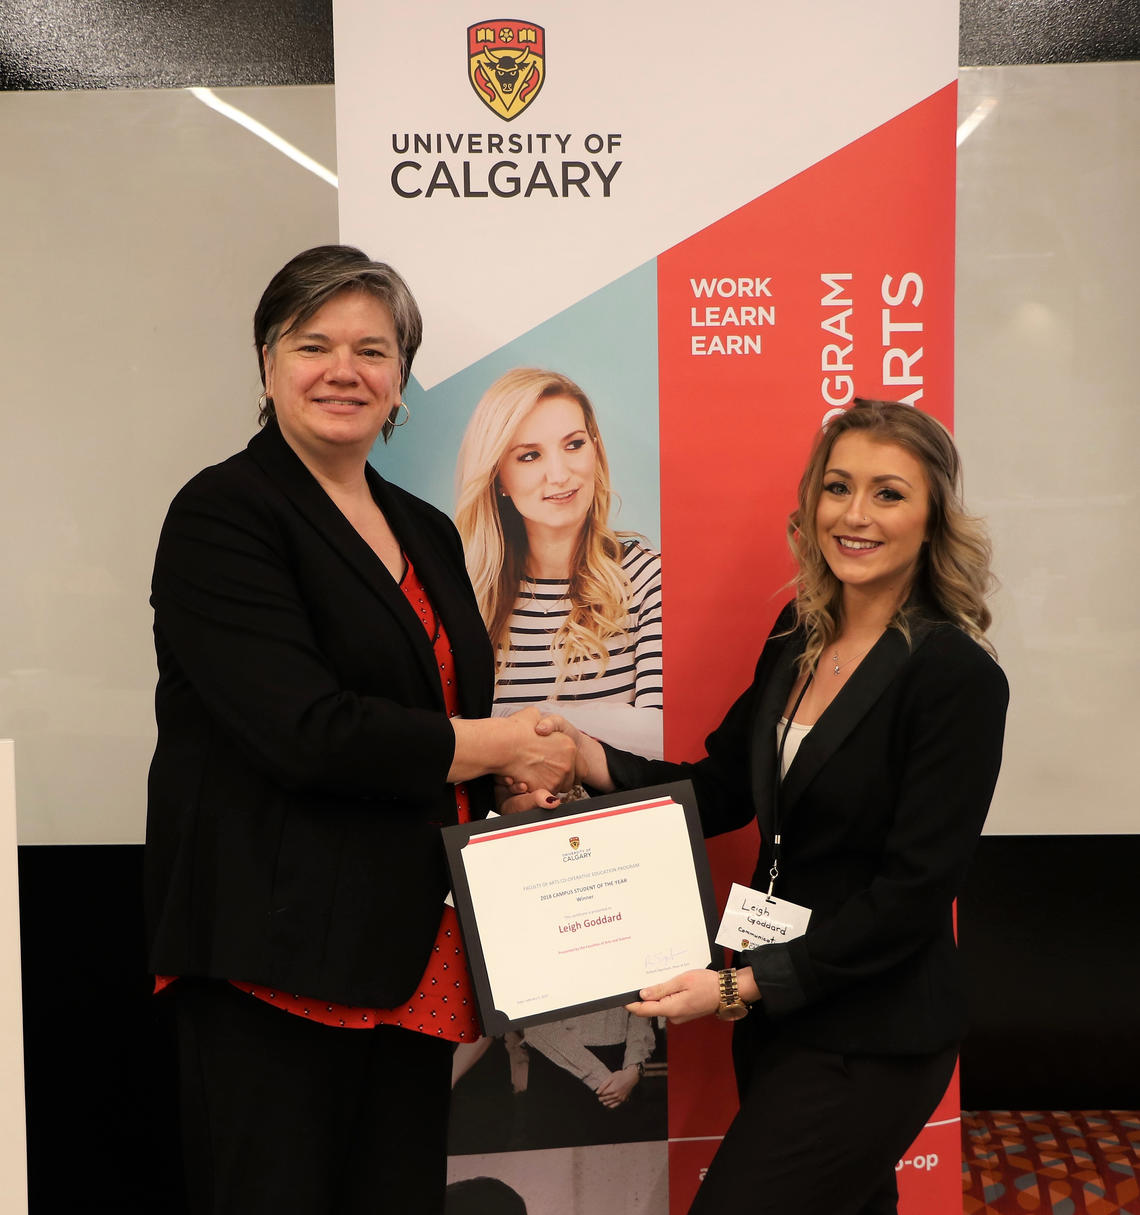 Pascale Sicotte, vice-dean of arts, presents Leigh Goddard with her certificate for winning Student of the Year working for an on-campus office. Goddard was nominated by her employer, Lies Thompson, for her excellent work done during her co-op placement in the Undergraduate Science Centre.